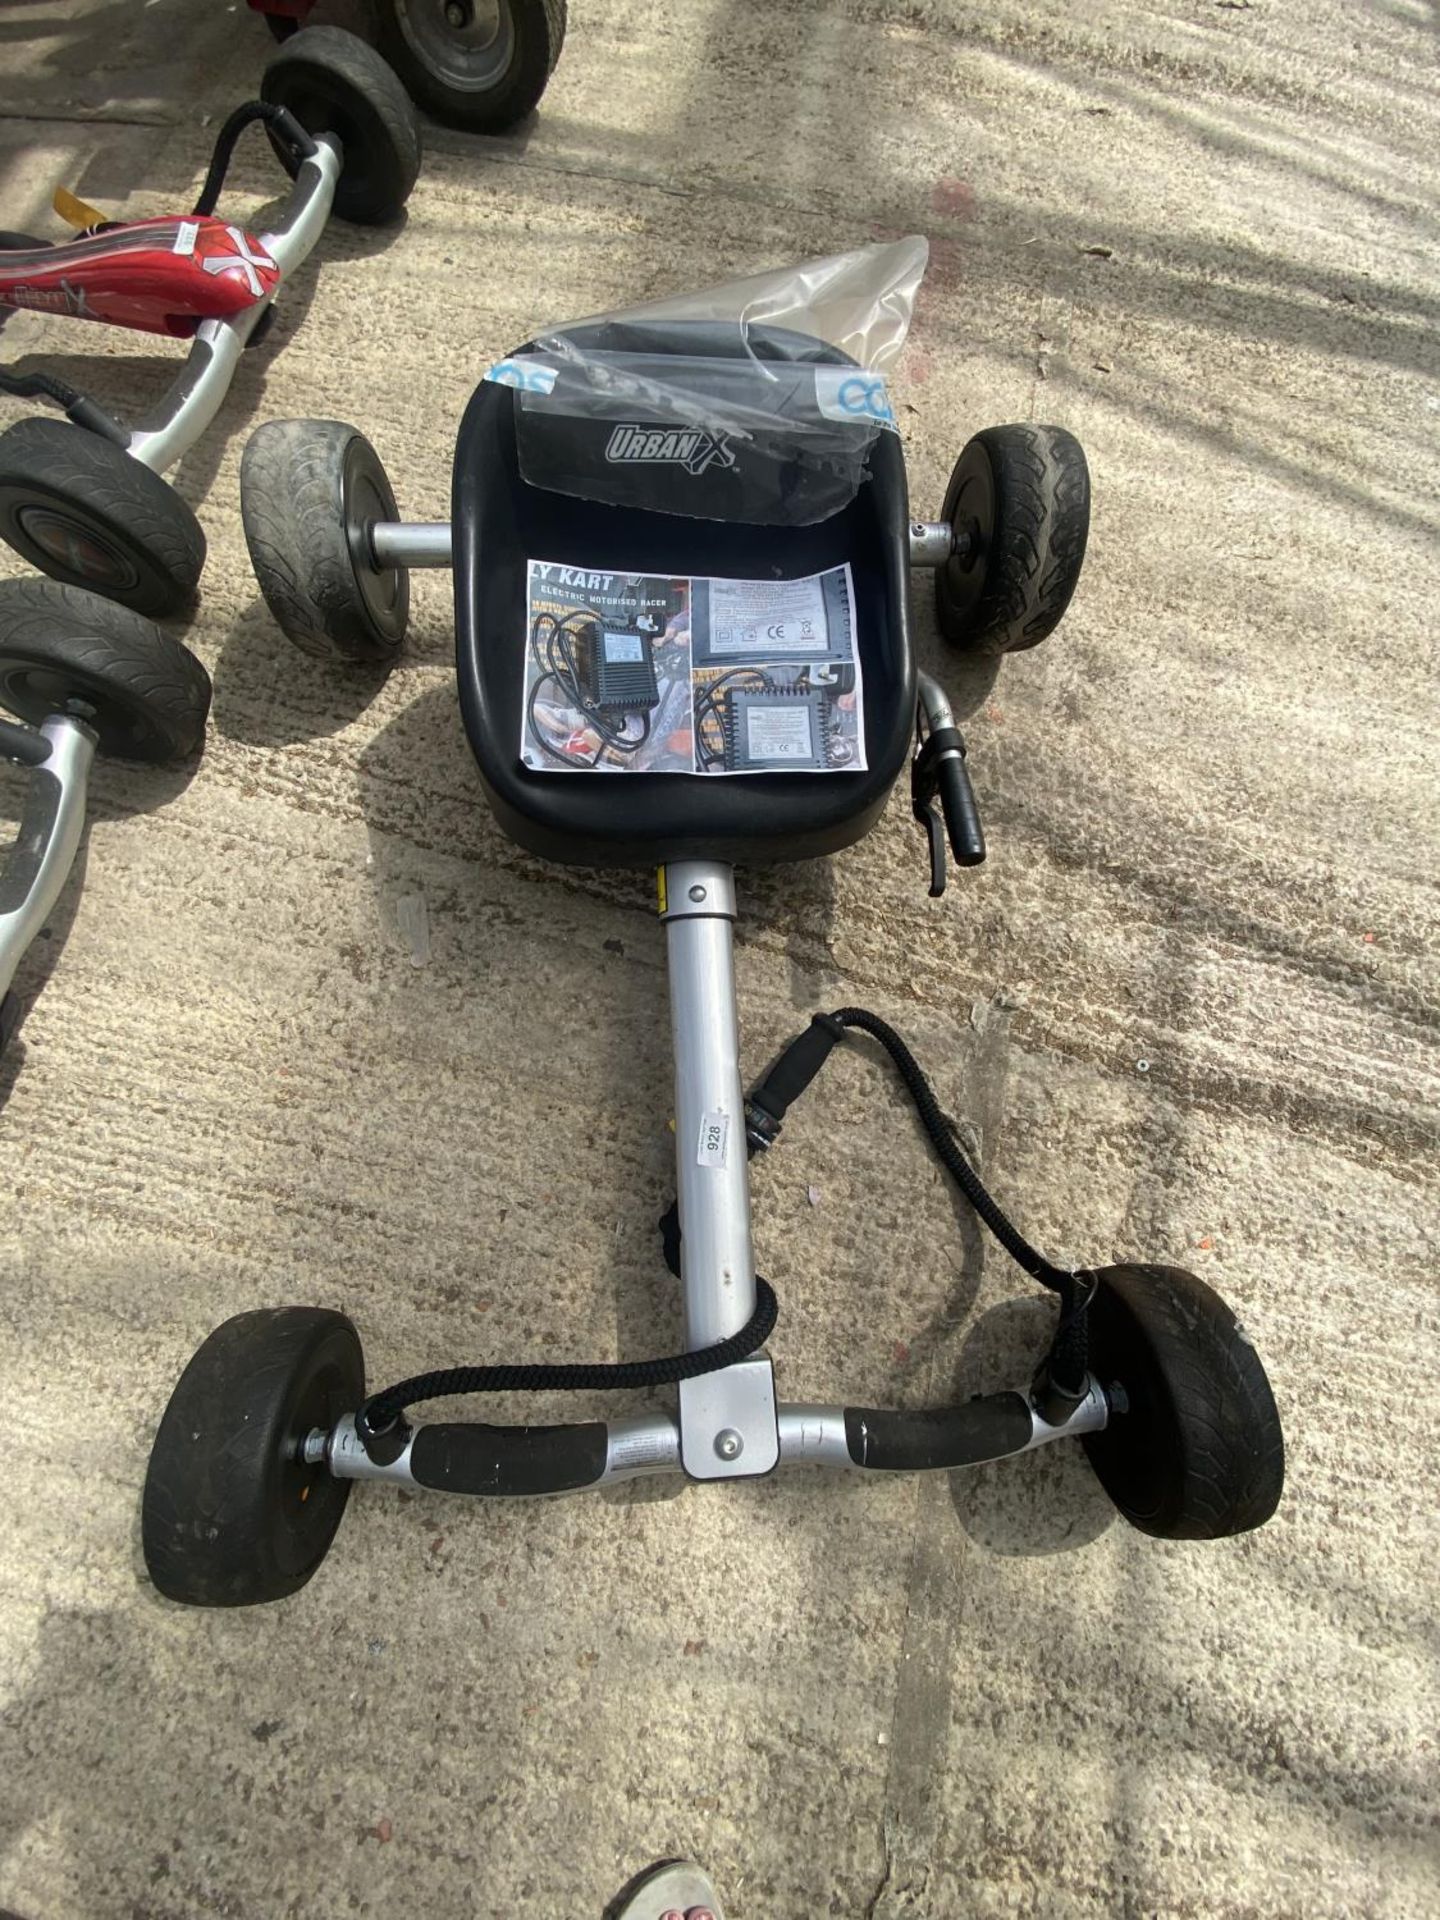 URBAN SILVER BILLY CART (NO CHARGER BUT USES A UNIVERSAL CHARGER) - NO VAT